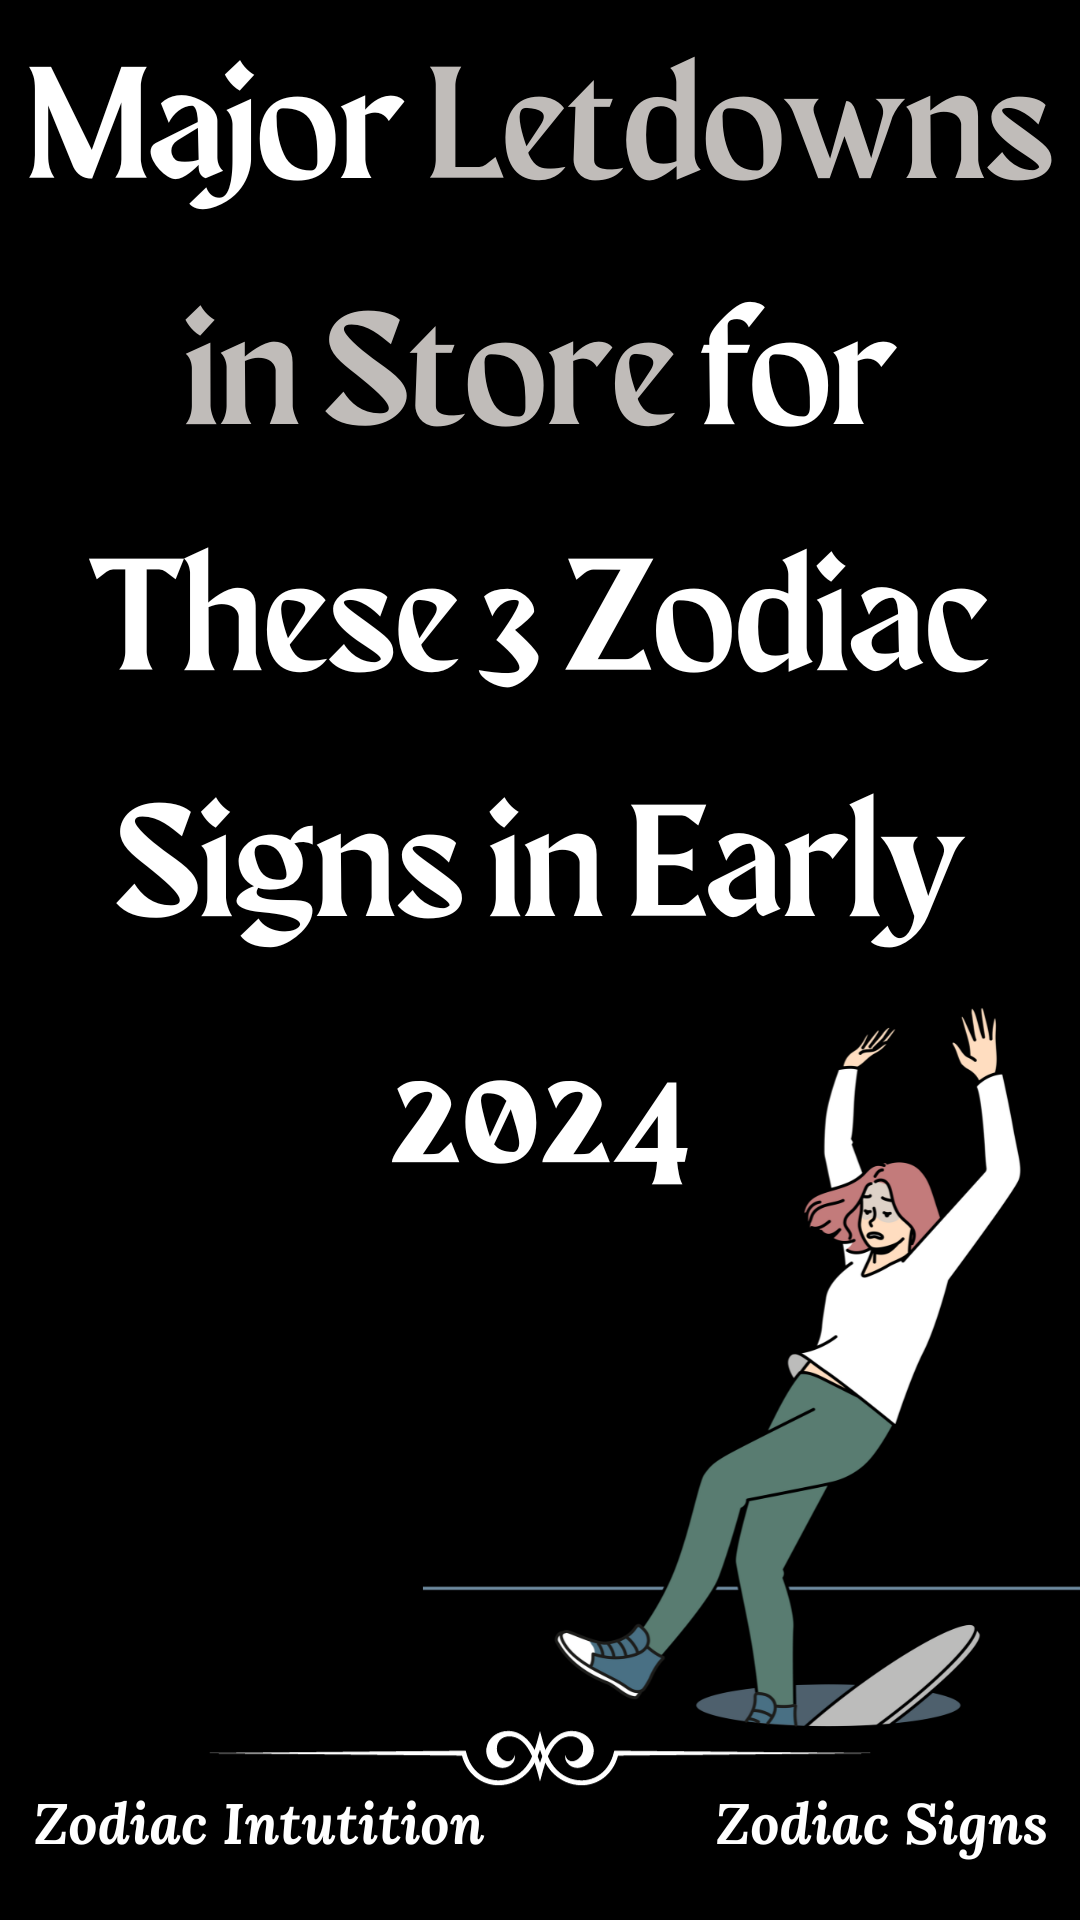 Major Letdowns in Store for These 3 Zodiac Signs in Early 2024